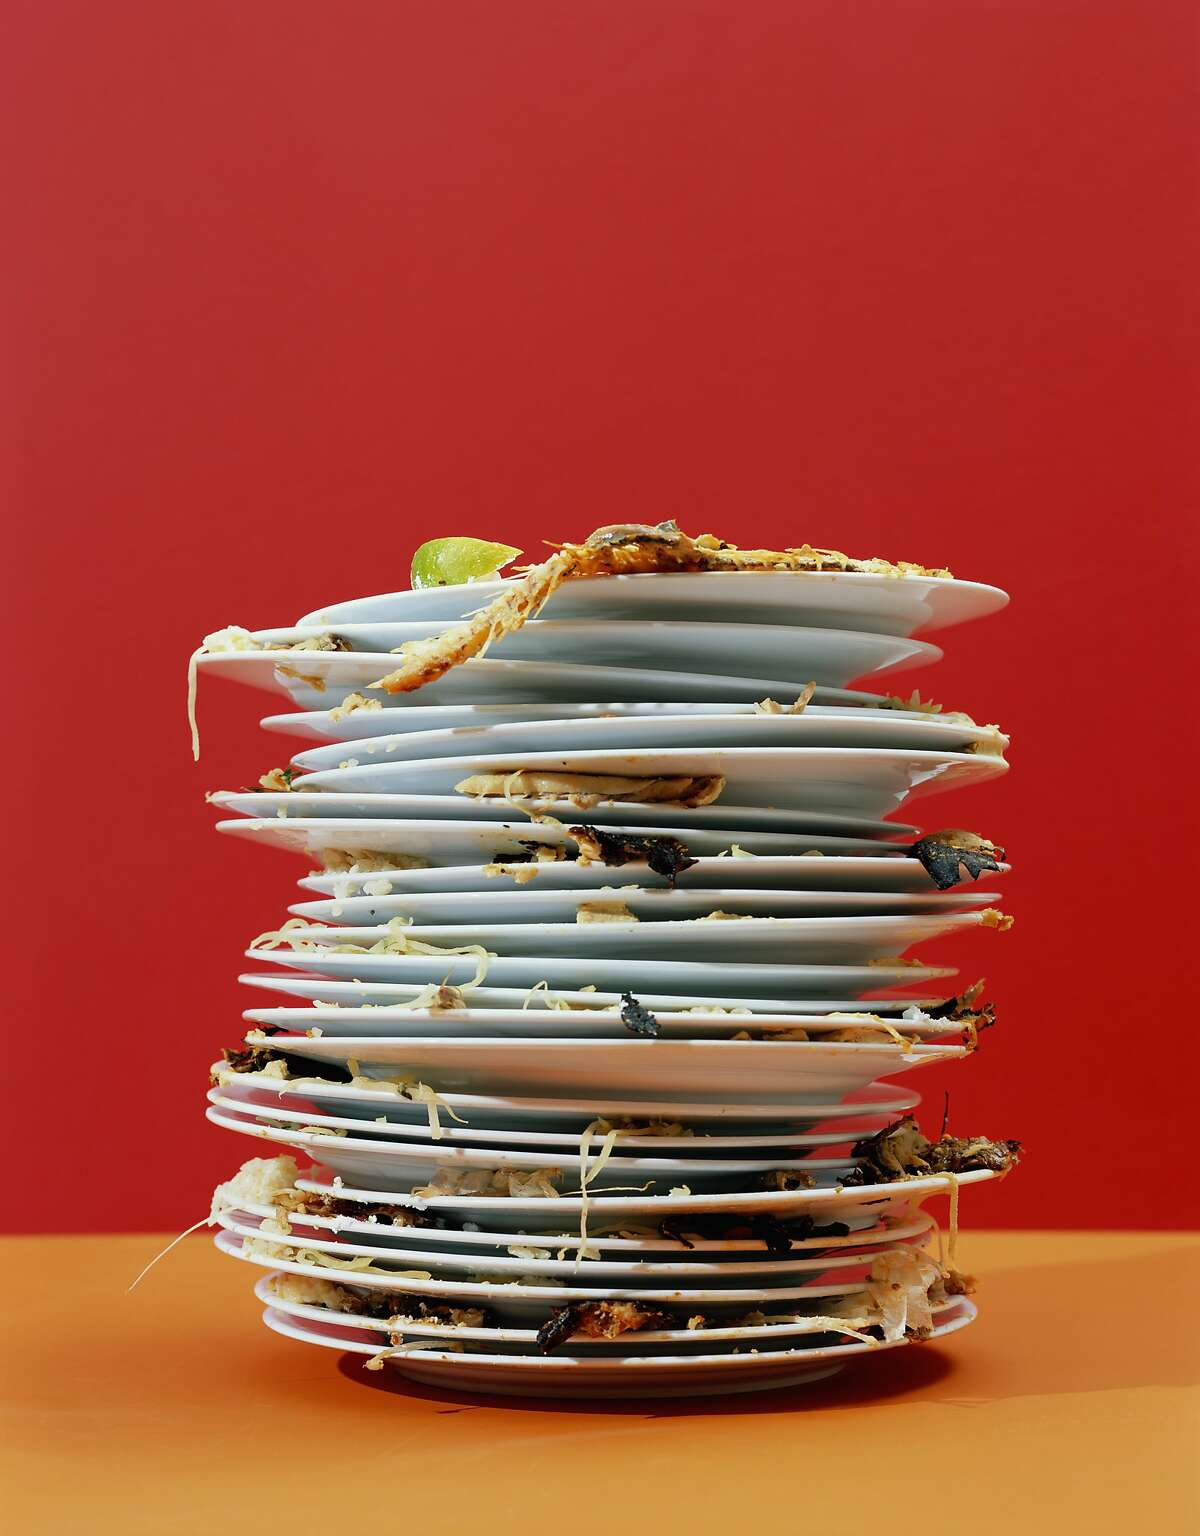 Stack of dirty dishes